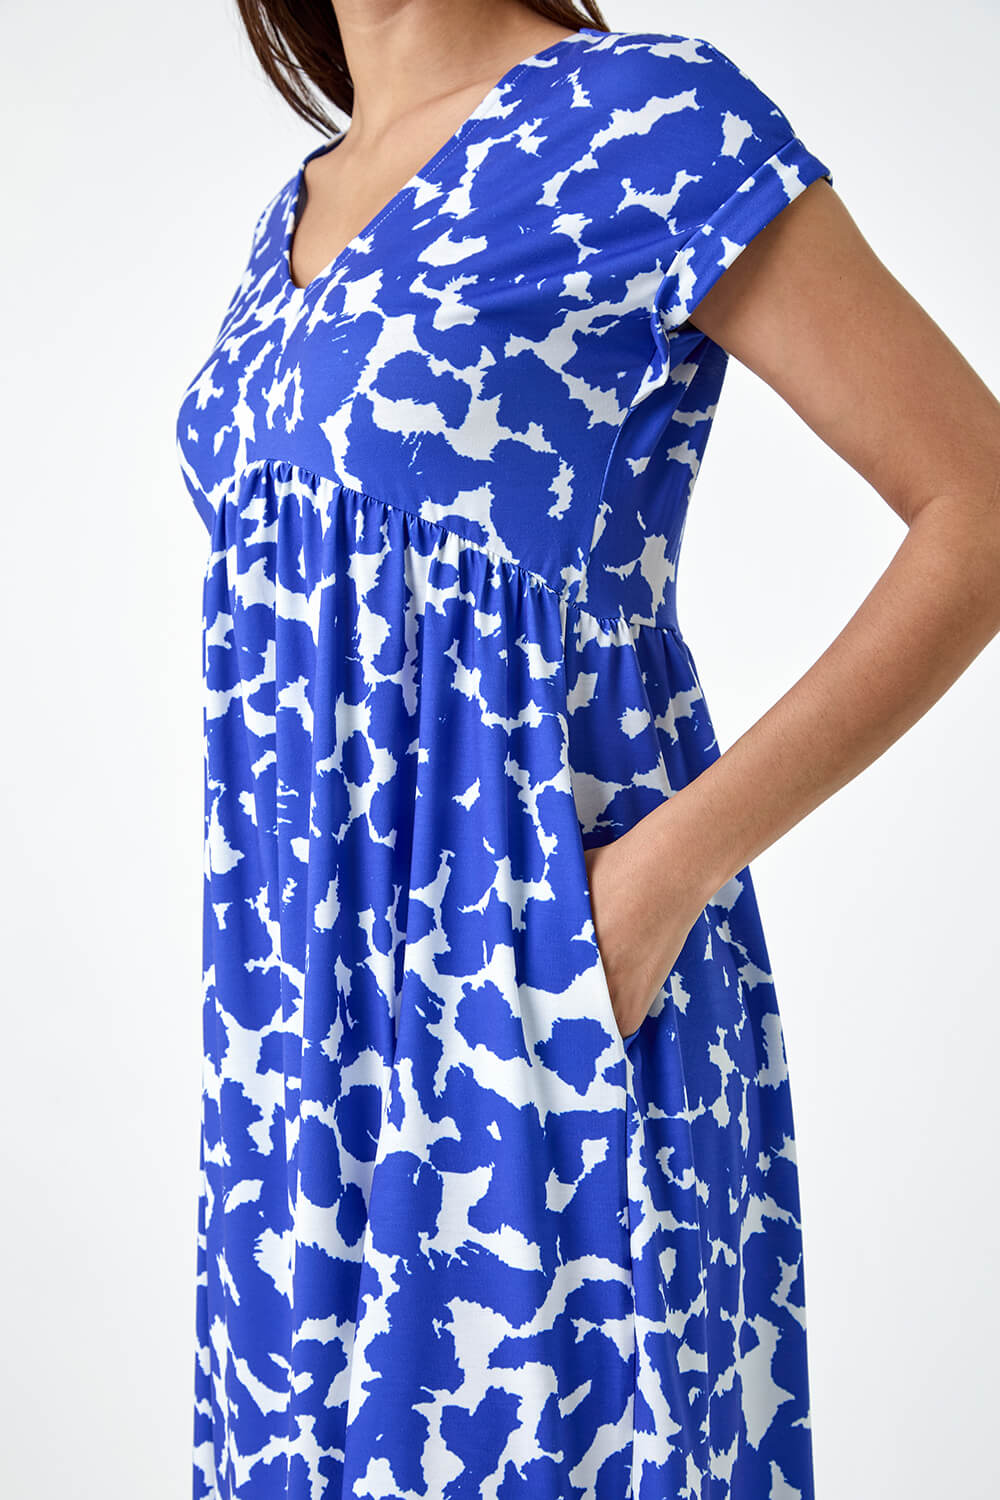 Blue Abstract Print Stretch Pocket T-Shirt Dress, Image 5 of 5